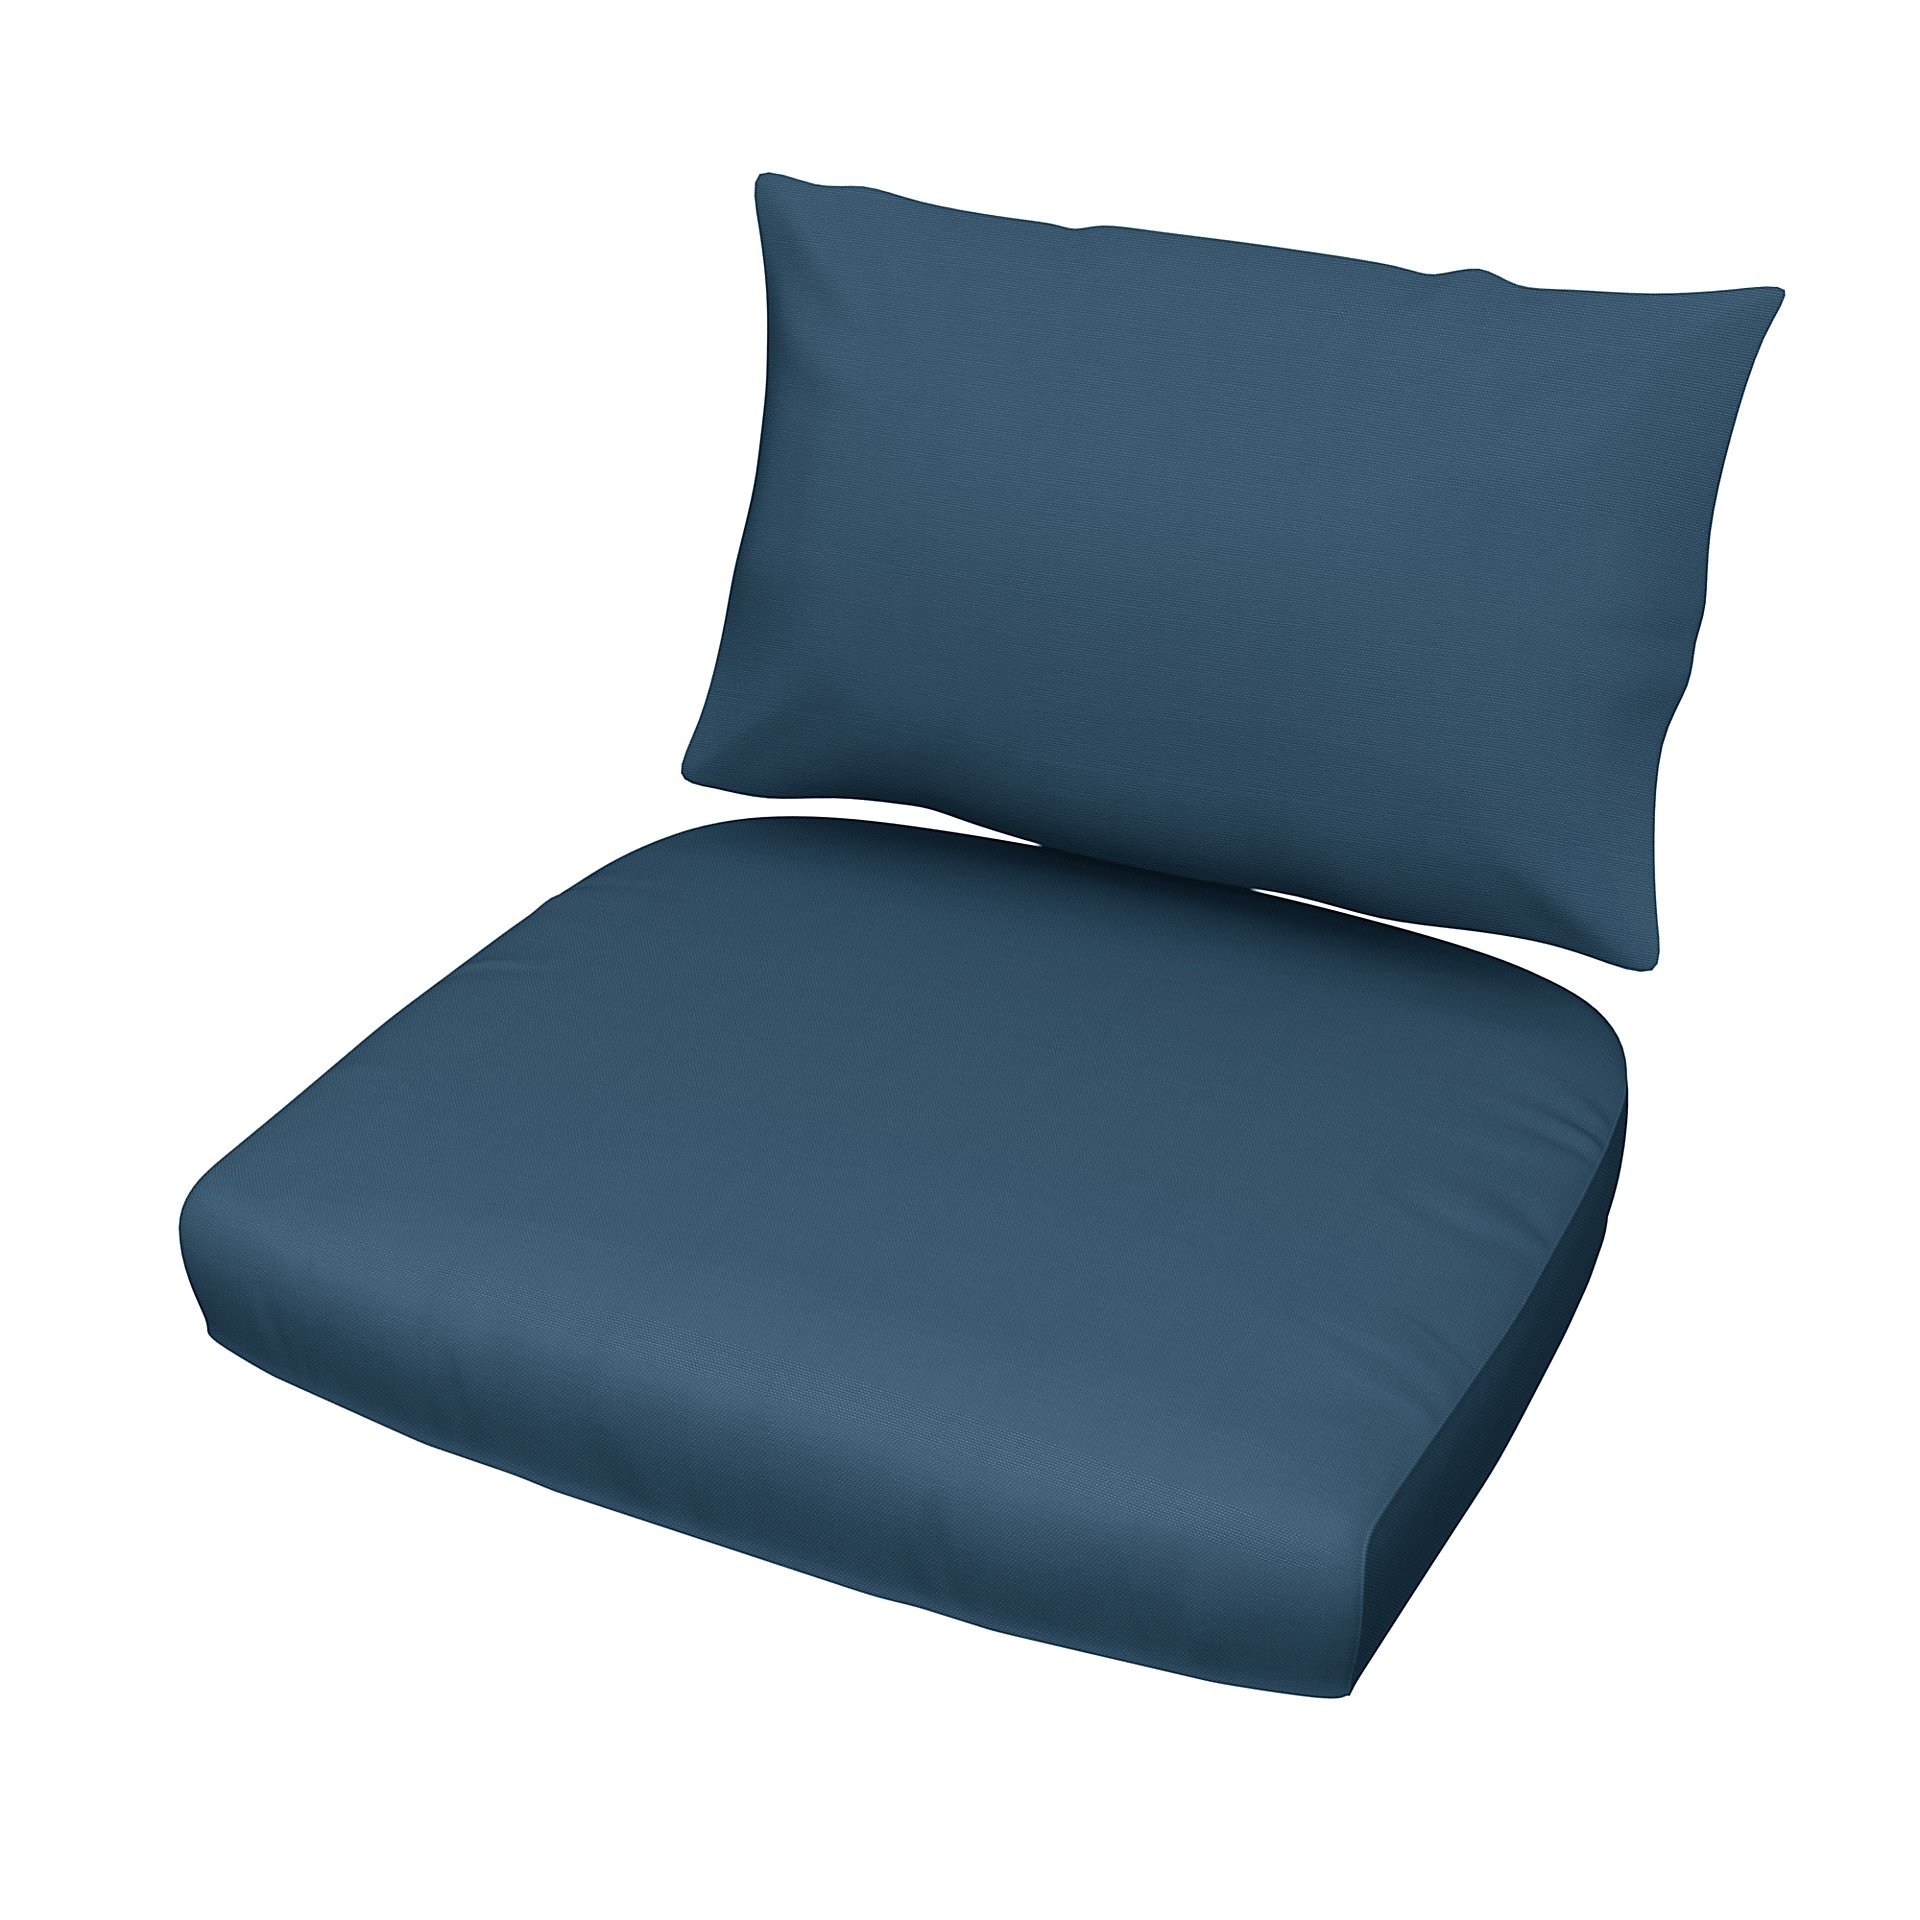 IKEA - Stockholm Rattan Chair Cushion Cover Set, Real Teal, Cotton - Bemz